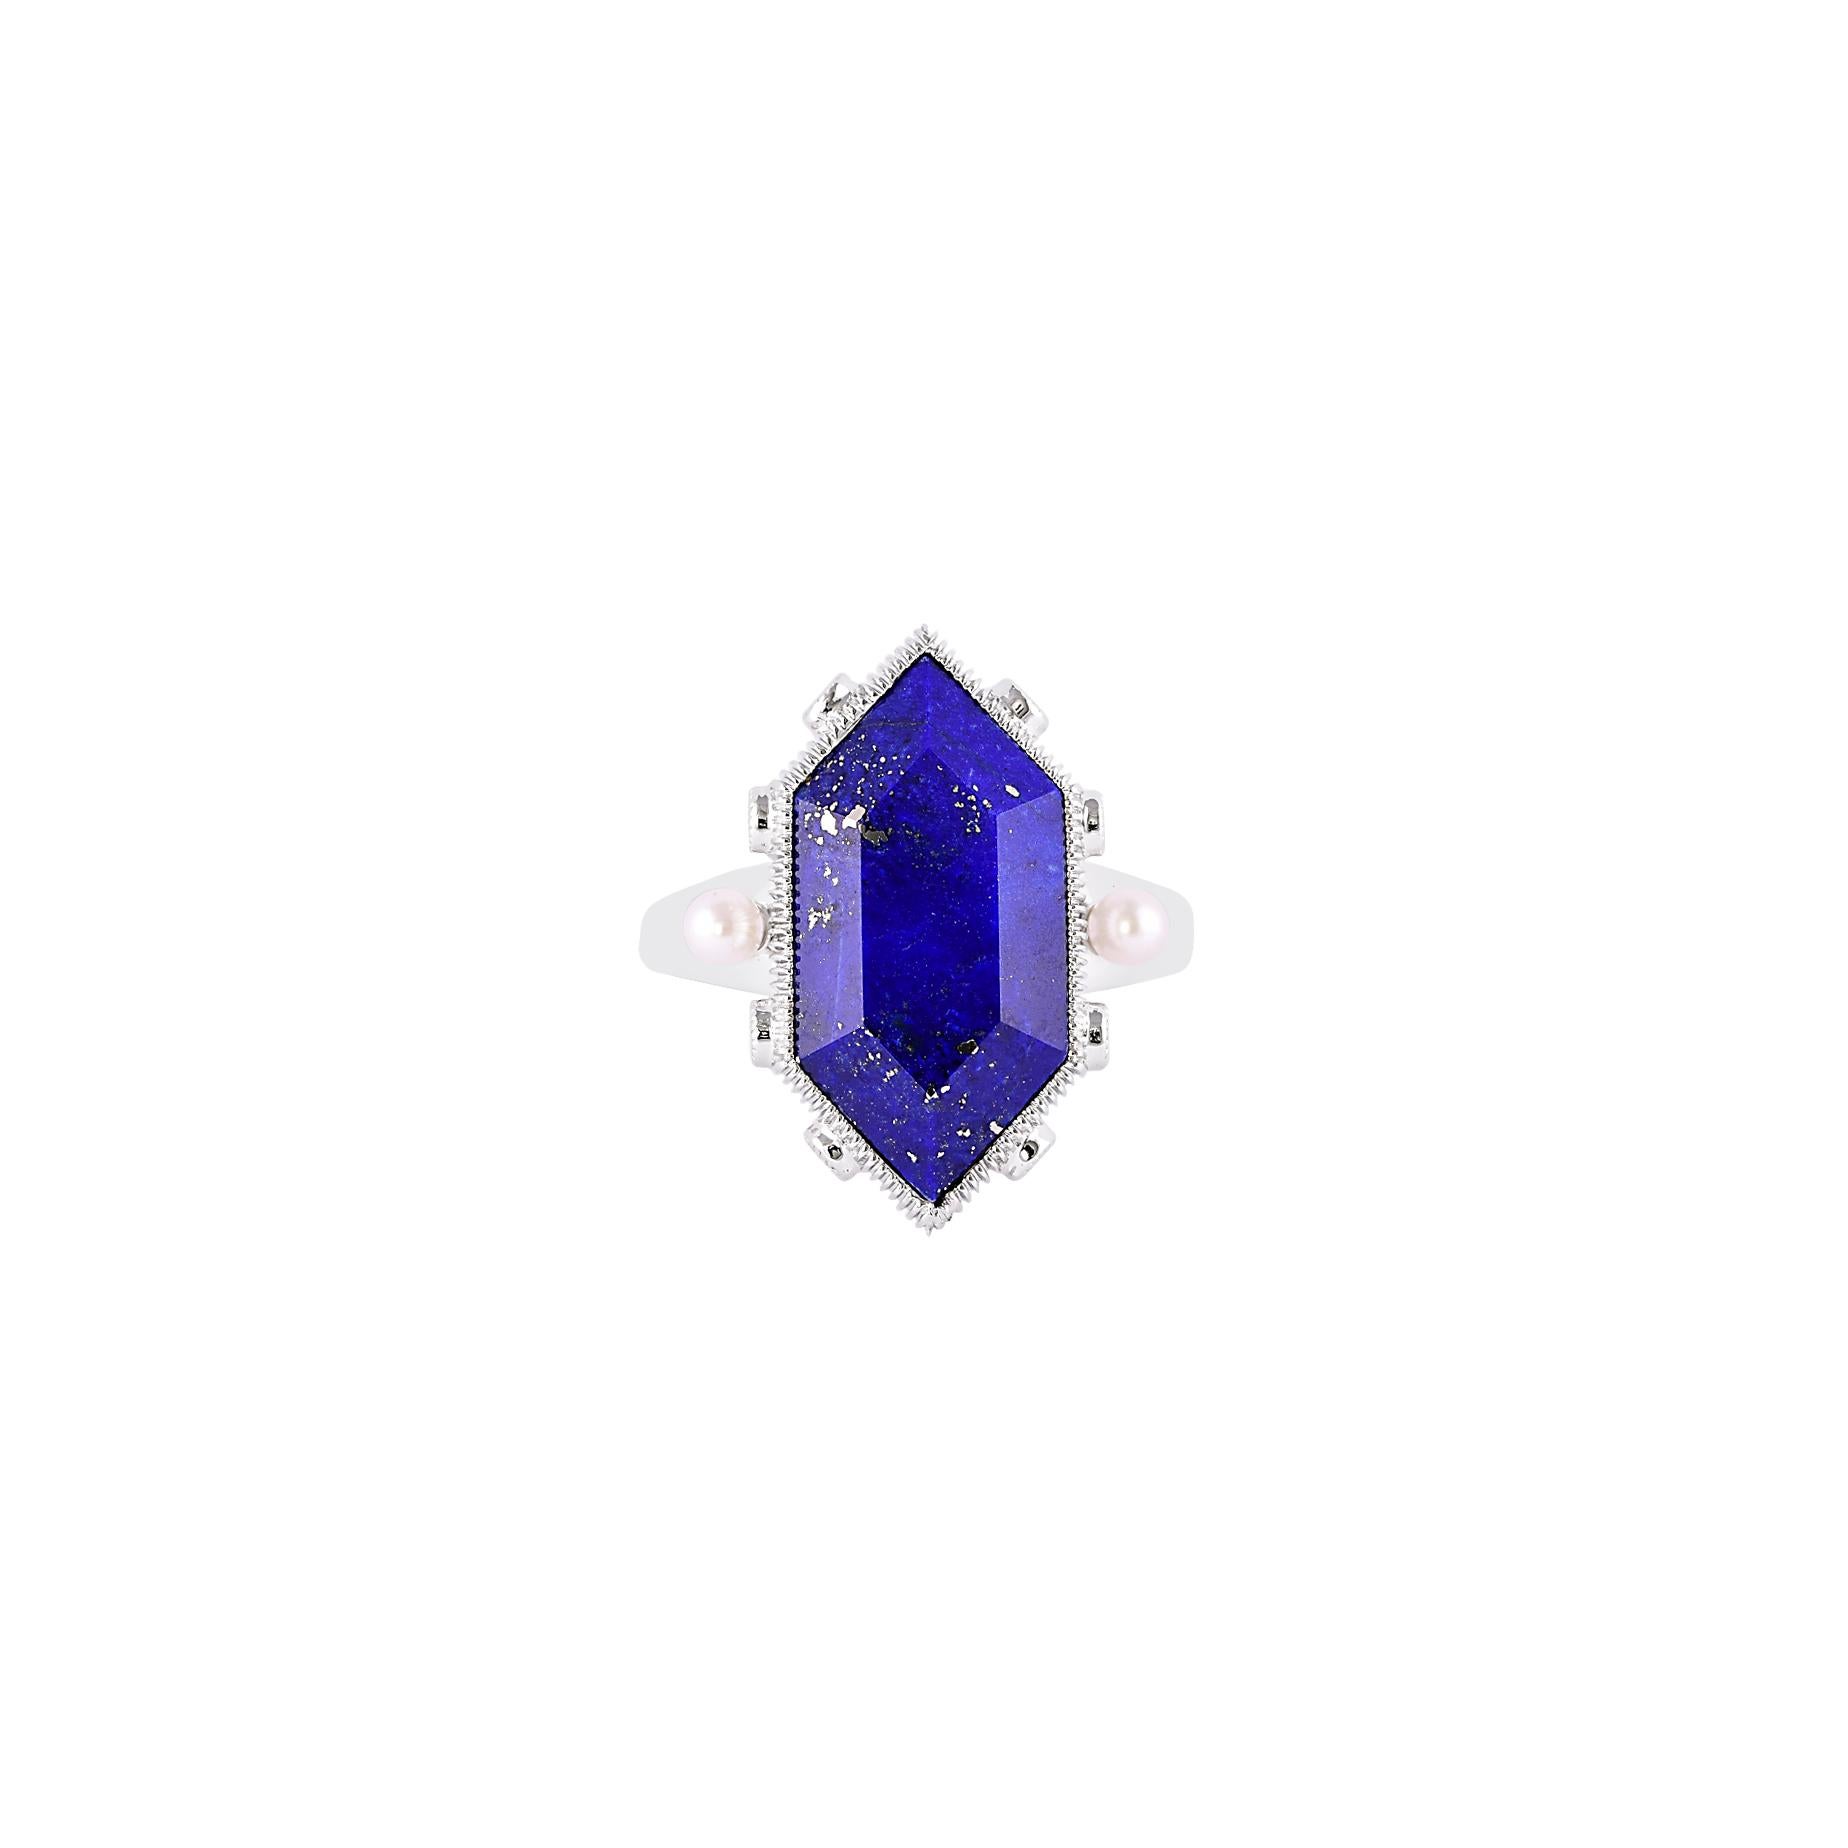 Sunita Nahata presents a series of 'Healing Hexagon' Rings made to wear everyday and bring harmony to the mind, body and soul. 

This is a luxurious lapis lazuli ring and this gemstone is particularly known to bring powerful energies to Libras but